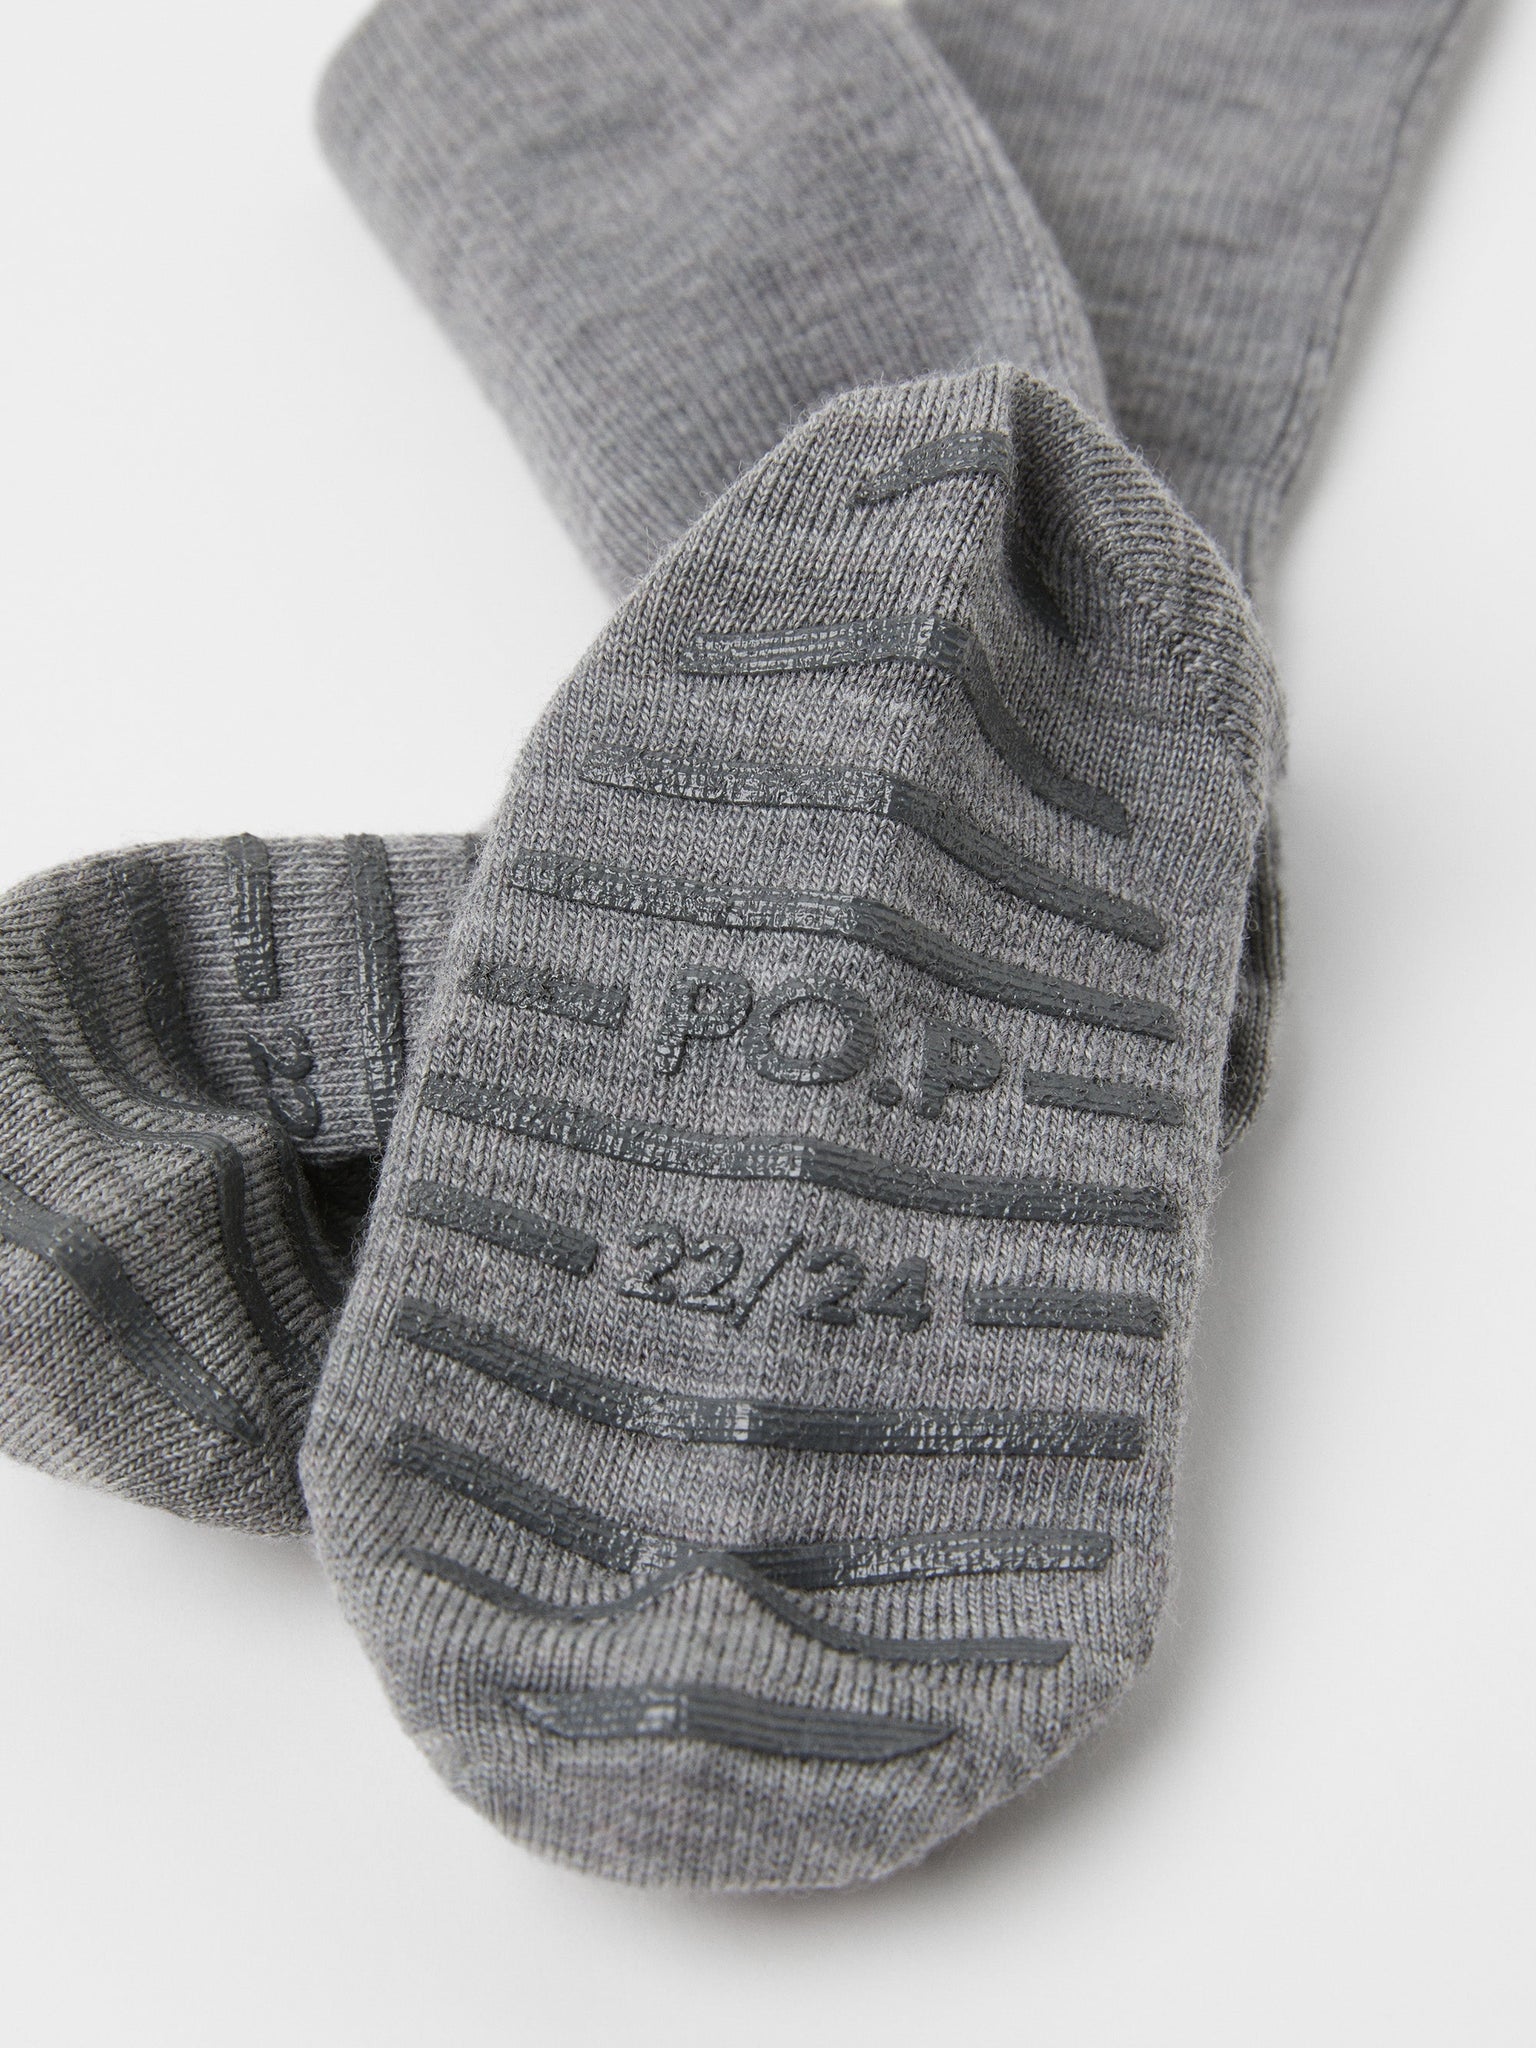 Merino Wool Grey Antislip Kids Socks from the Polarn O. Pyret kidswear collection. Nordic kids clothes made from sustainable sources.